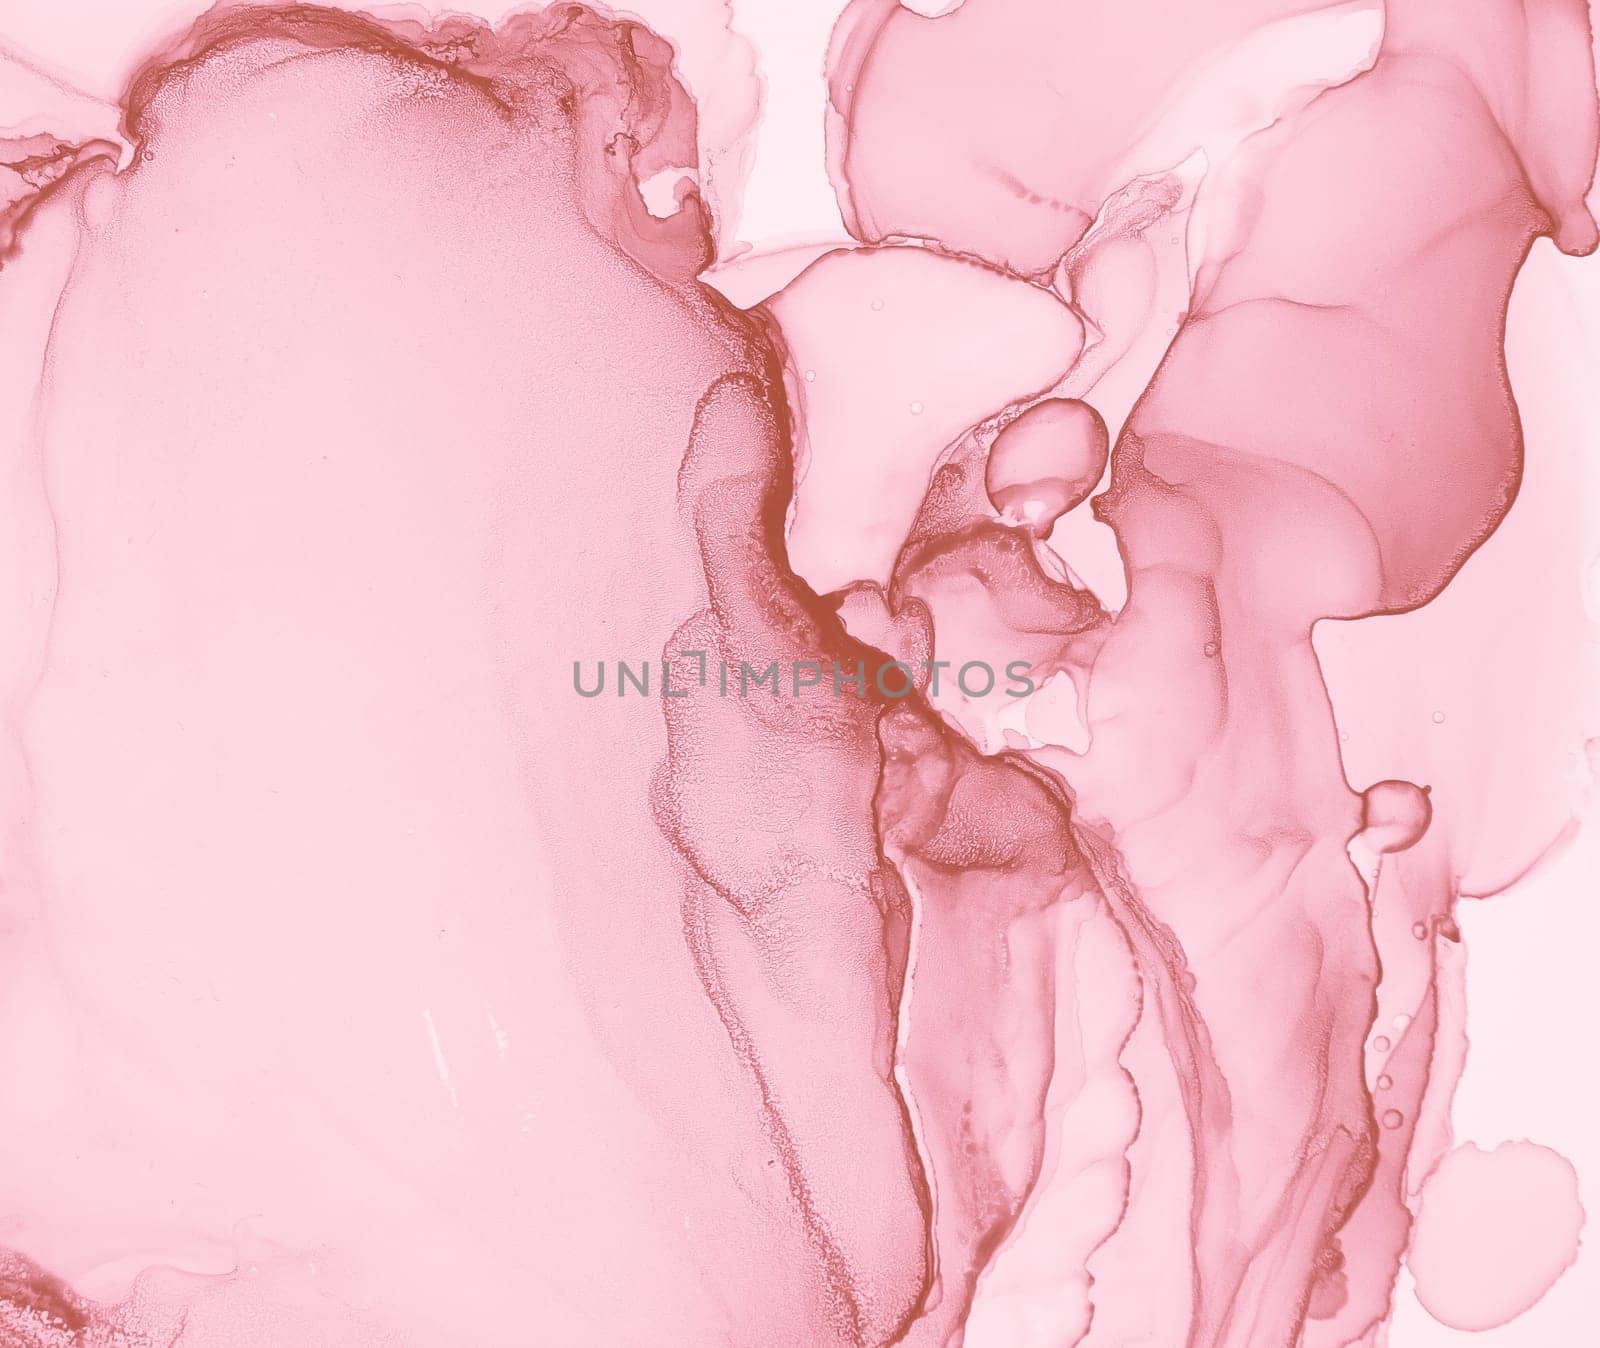 Feminine Luxury Marble. Abstract Wallpaper. Fluid Color Design. Acrylic Wall. Delicate Oil Effect. Alcohol Liquid Marble. Gentle Background. Art Gradient Paint. Ethereal Pink Marble.